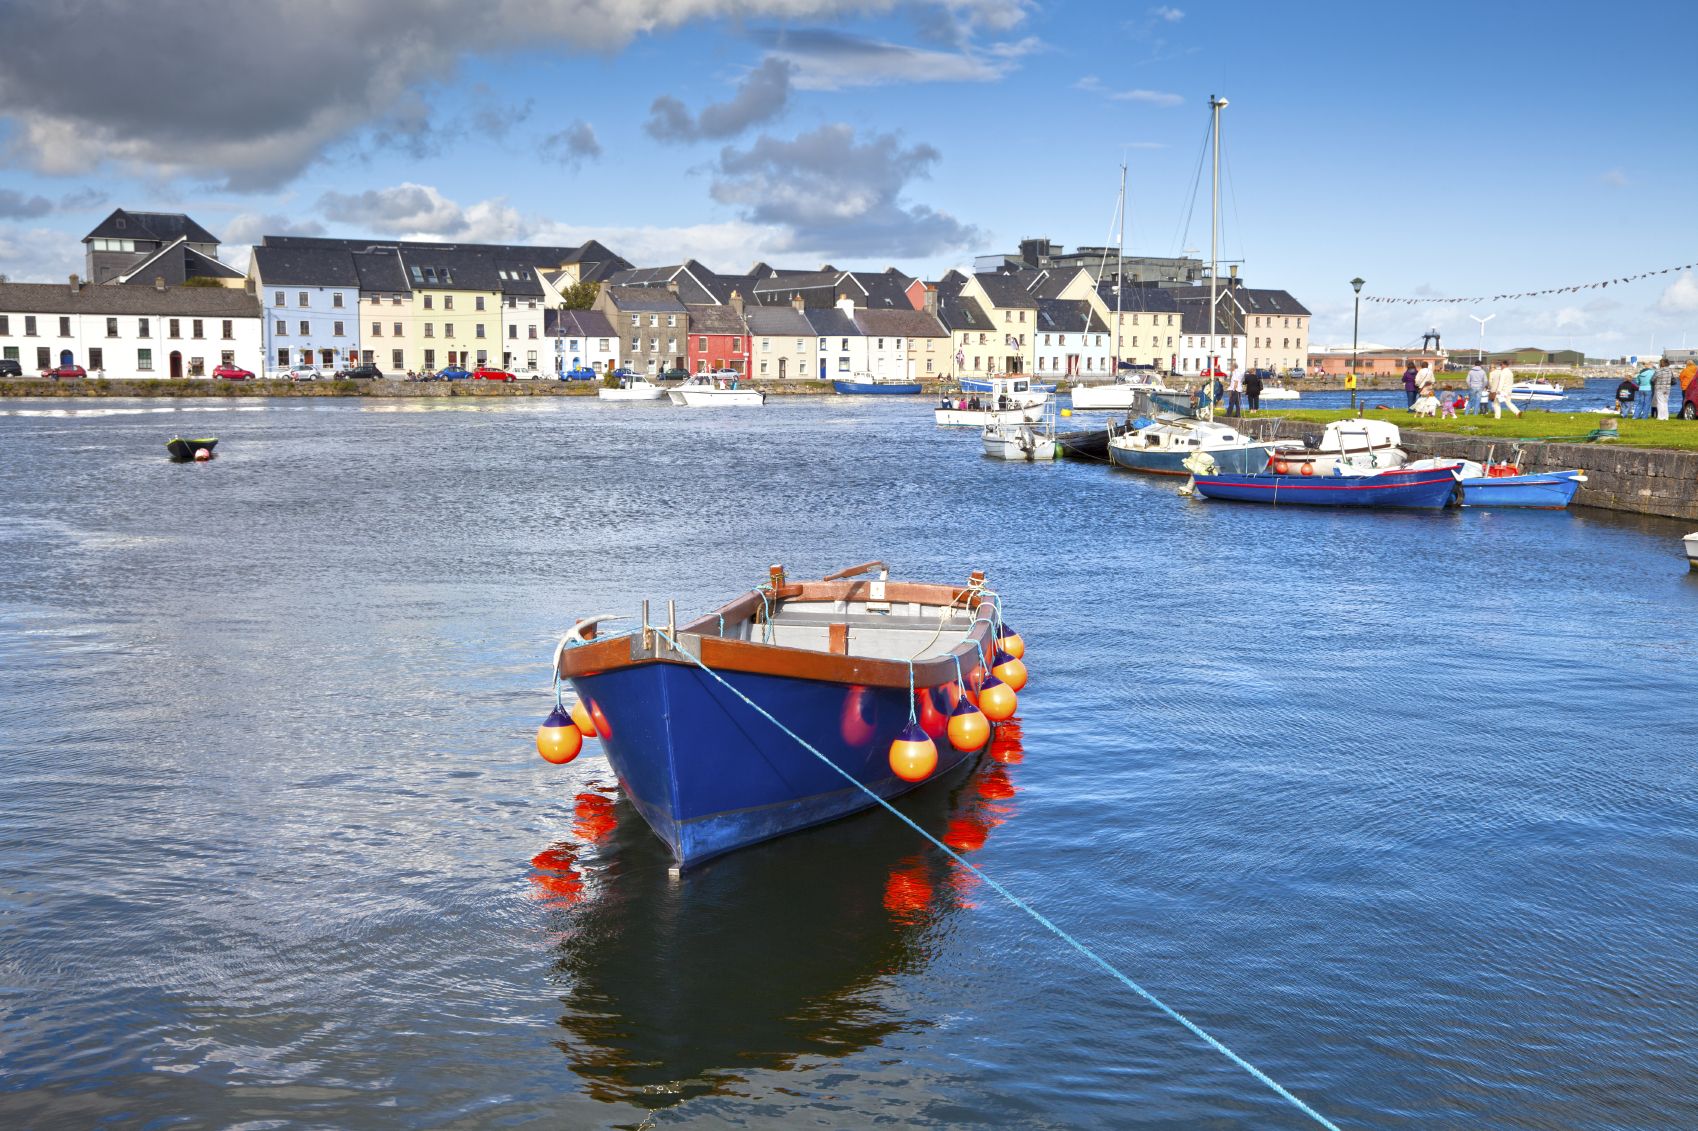 Towns In Galway Ireland | Boat in Galway Bay in front of old Galway ...